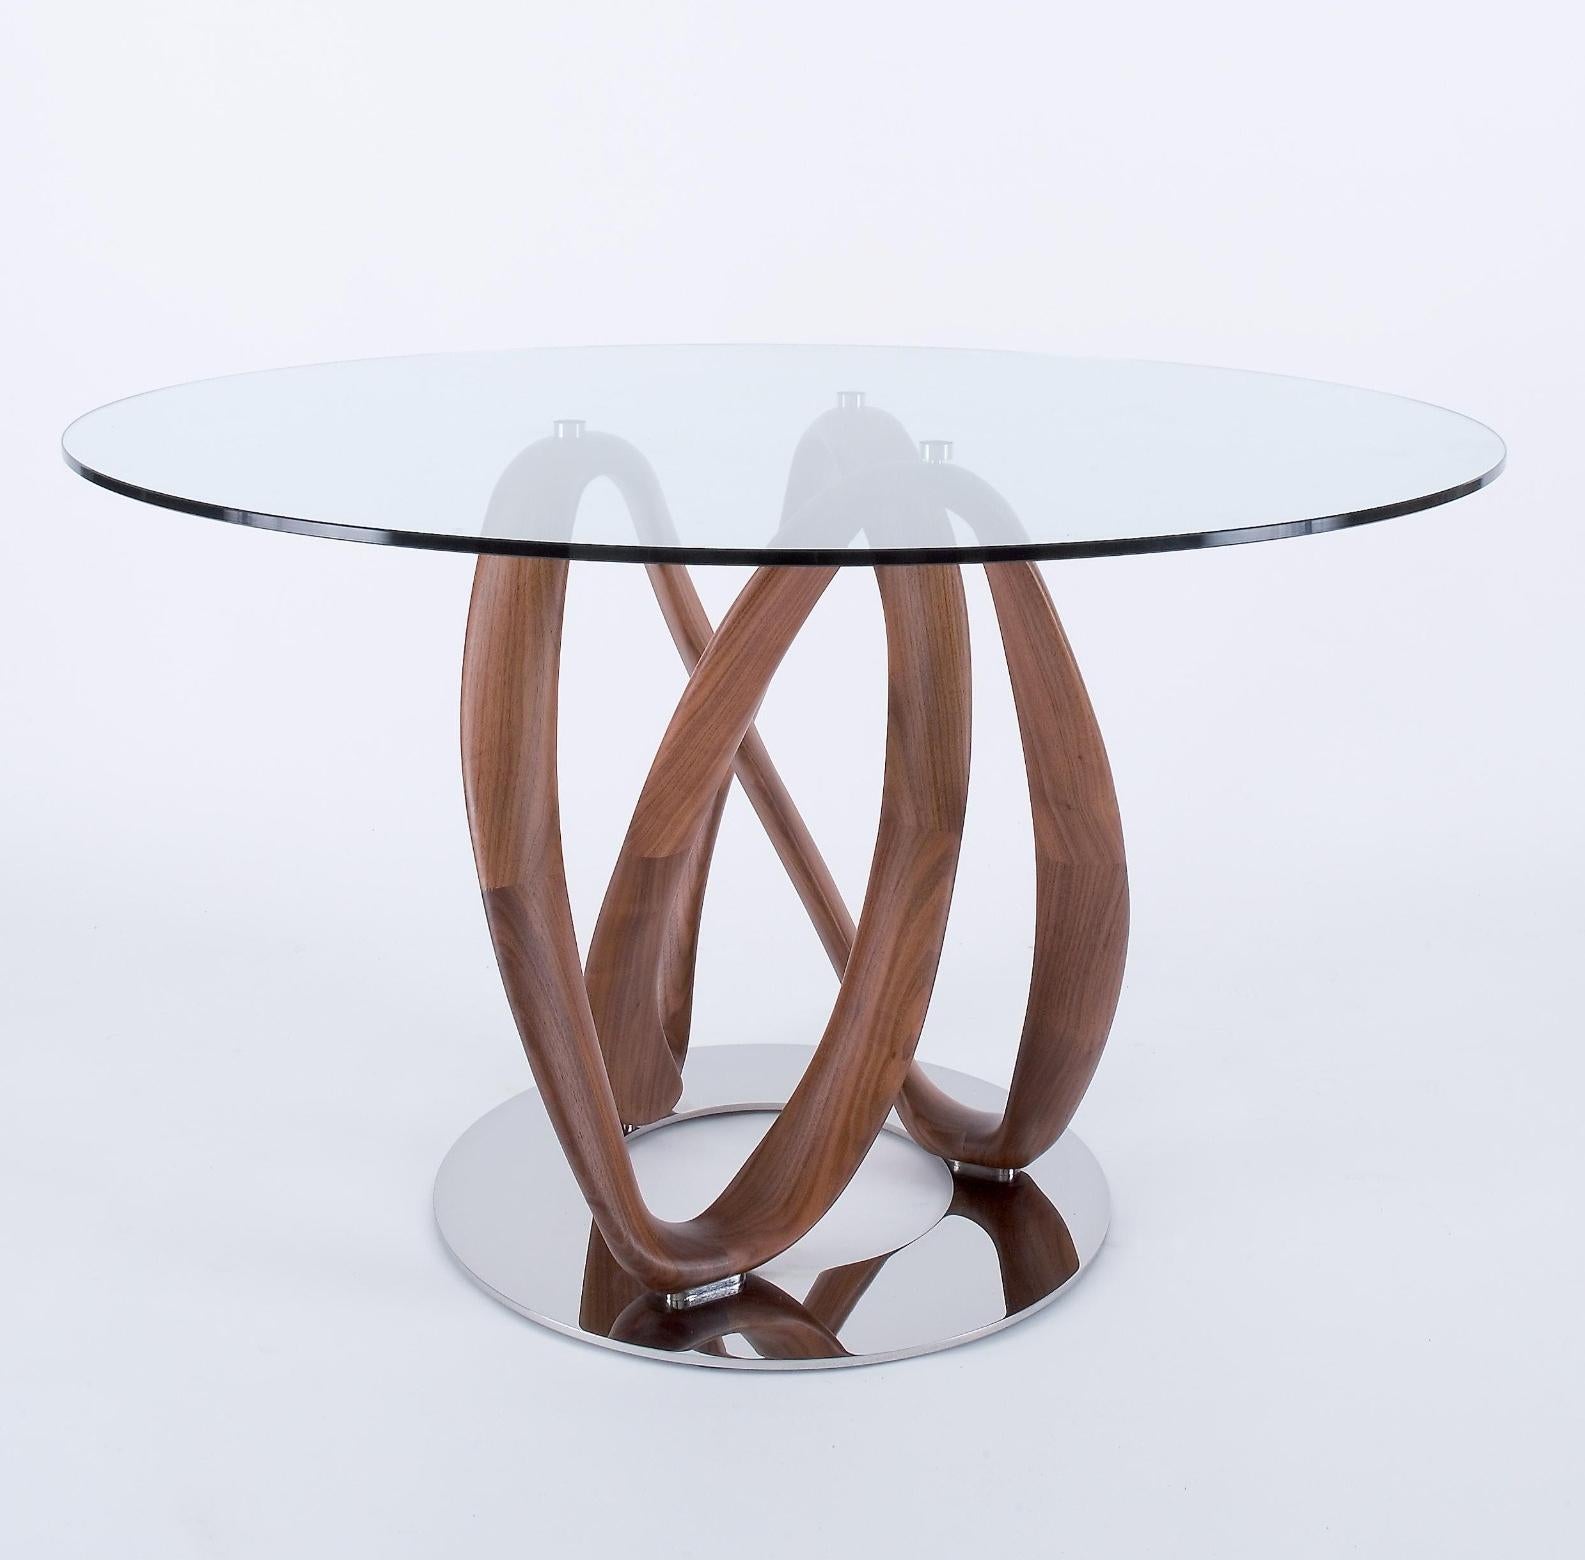 Infinity table, Stefano Bigi for Porada
A solid walnut and round crystal top
75cm x 130cm
very good condition

When a young Milan-based designer, Stefano Bigi, approached Porada with his design for the ‘Infinity’ table in 2009, just four years